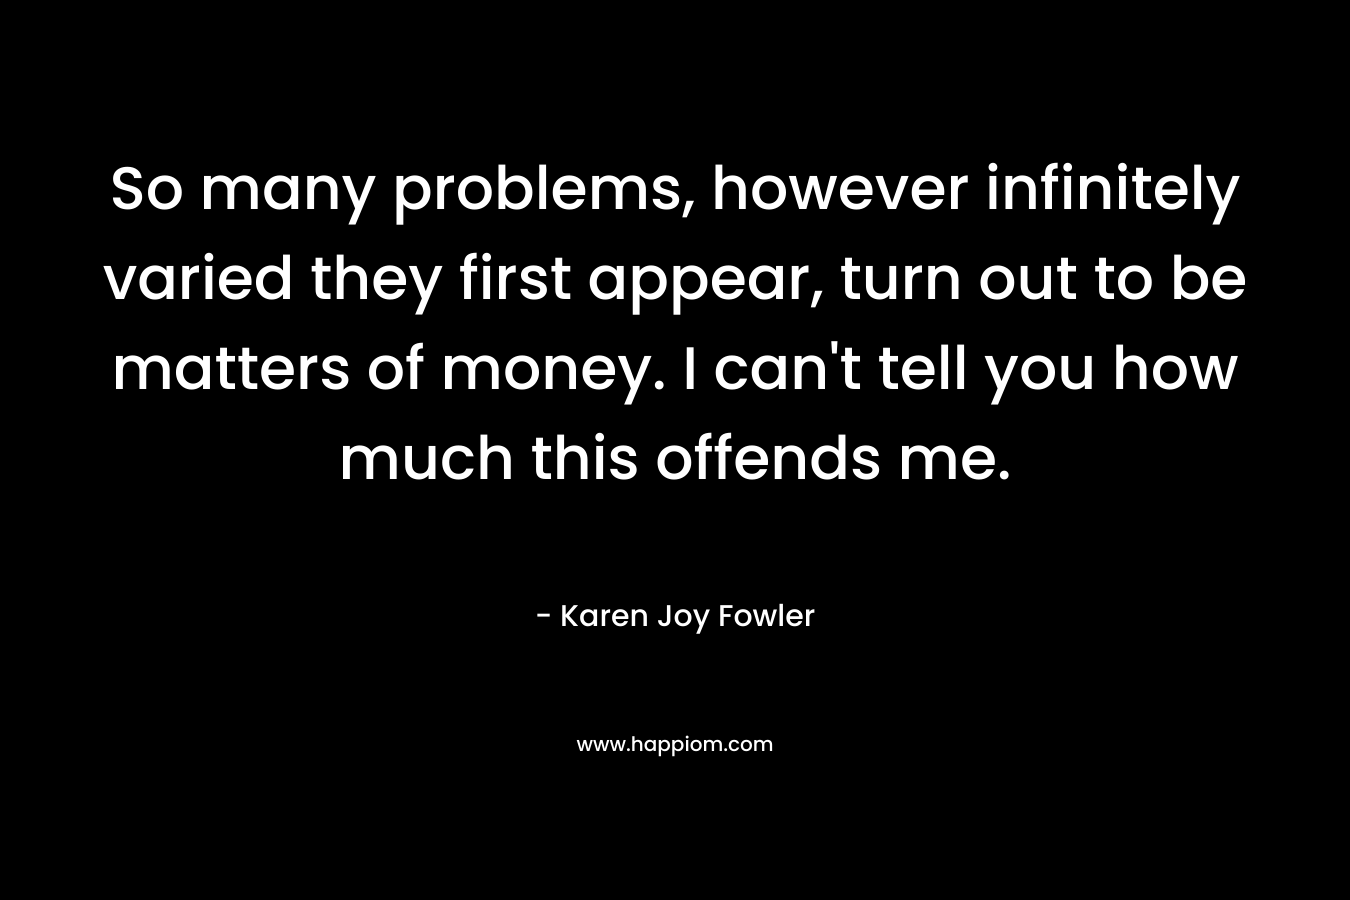 So many problems, however infinitely varied they first appear, turn out to be matters of money. I can’t tell you how much this offends me. – Karen Joy Fowler